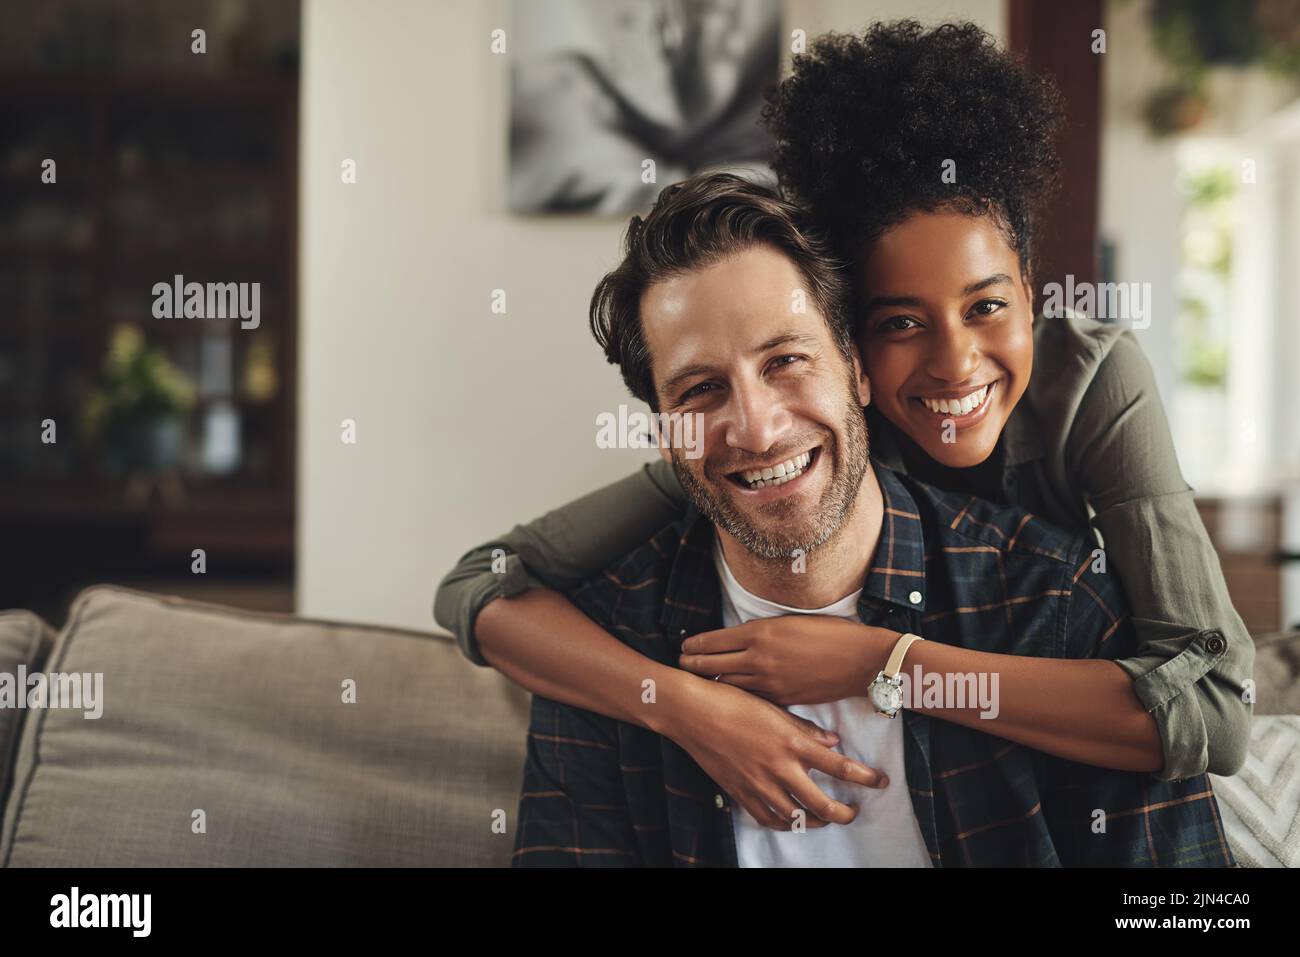 We bring nothing but happiness into each others lives. Portrait of an affectionate young couple spending the day together at home. Stock Photo